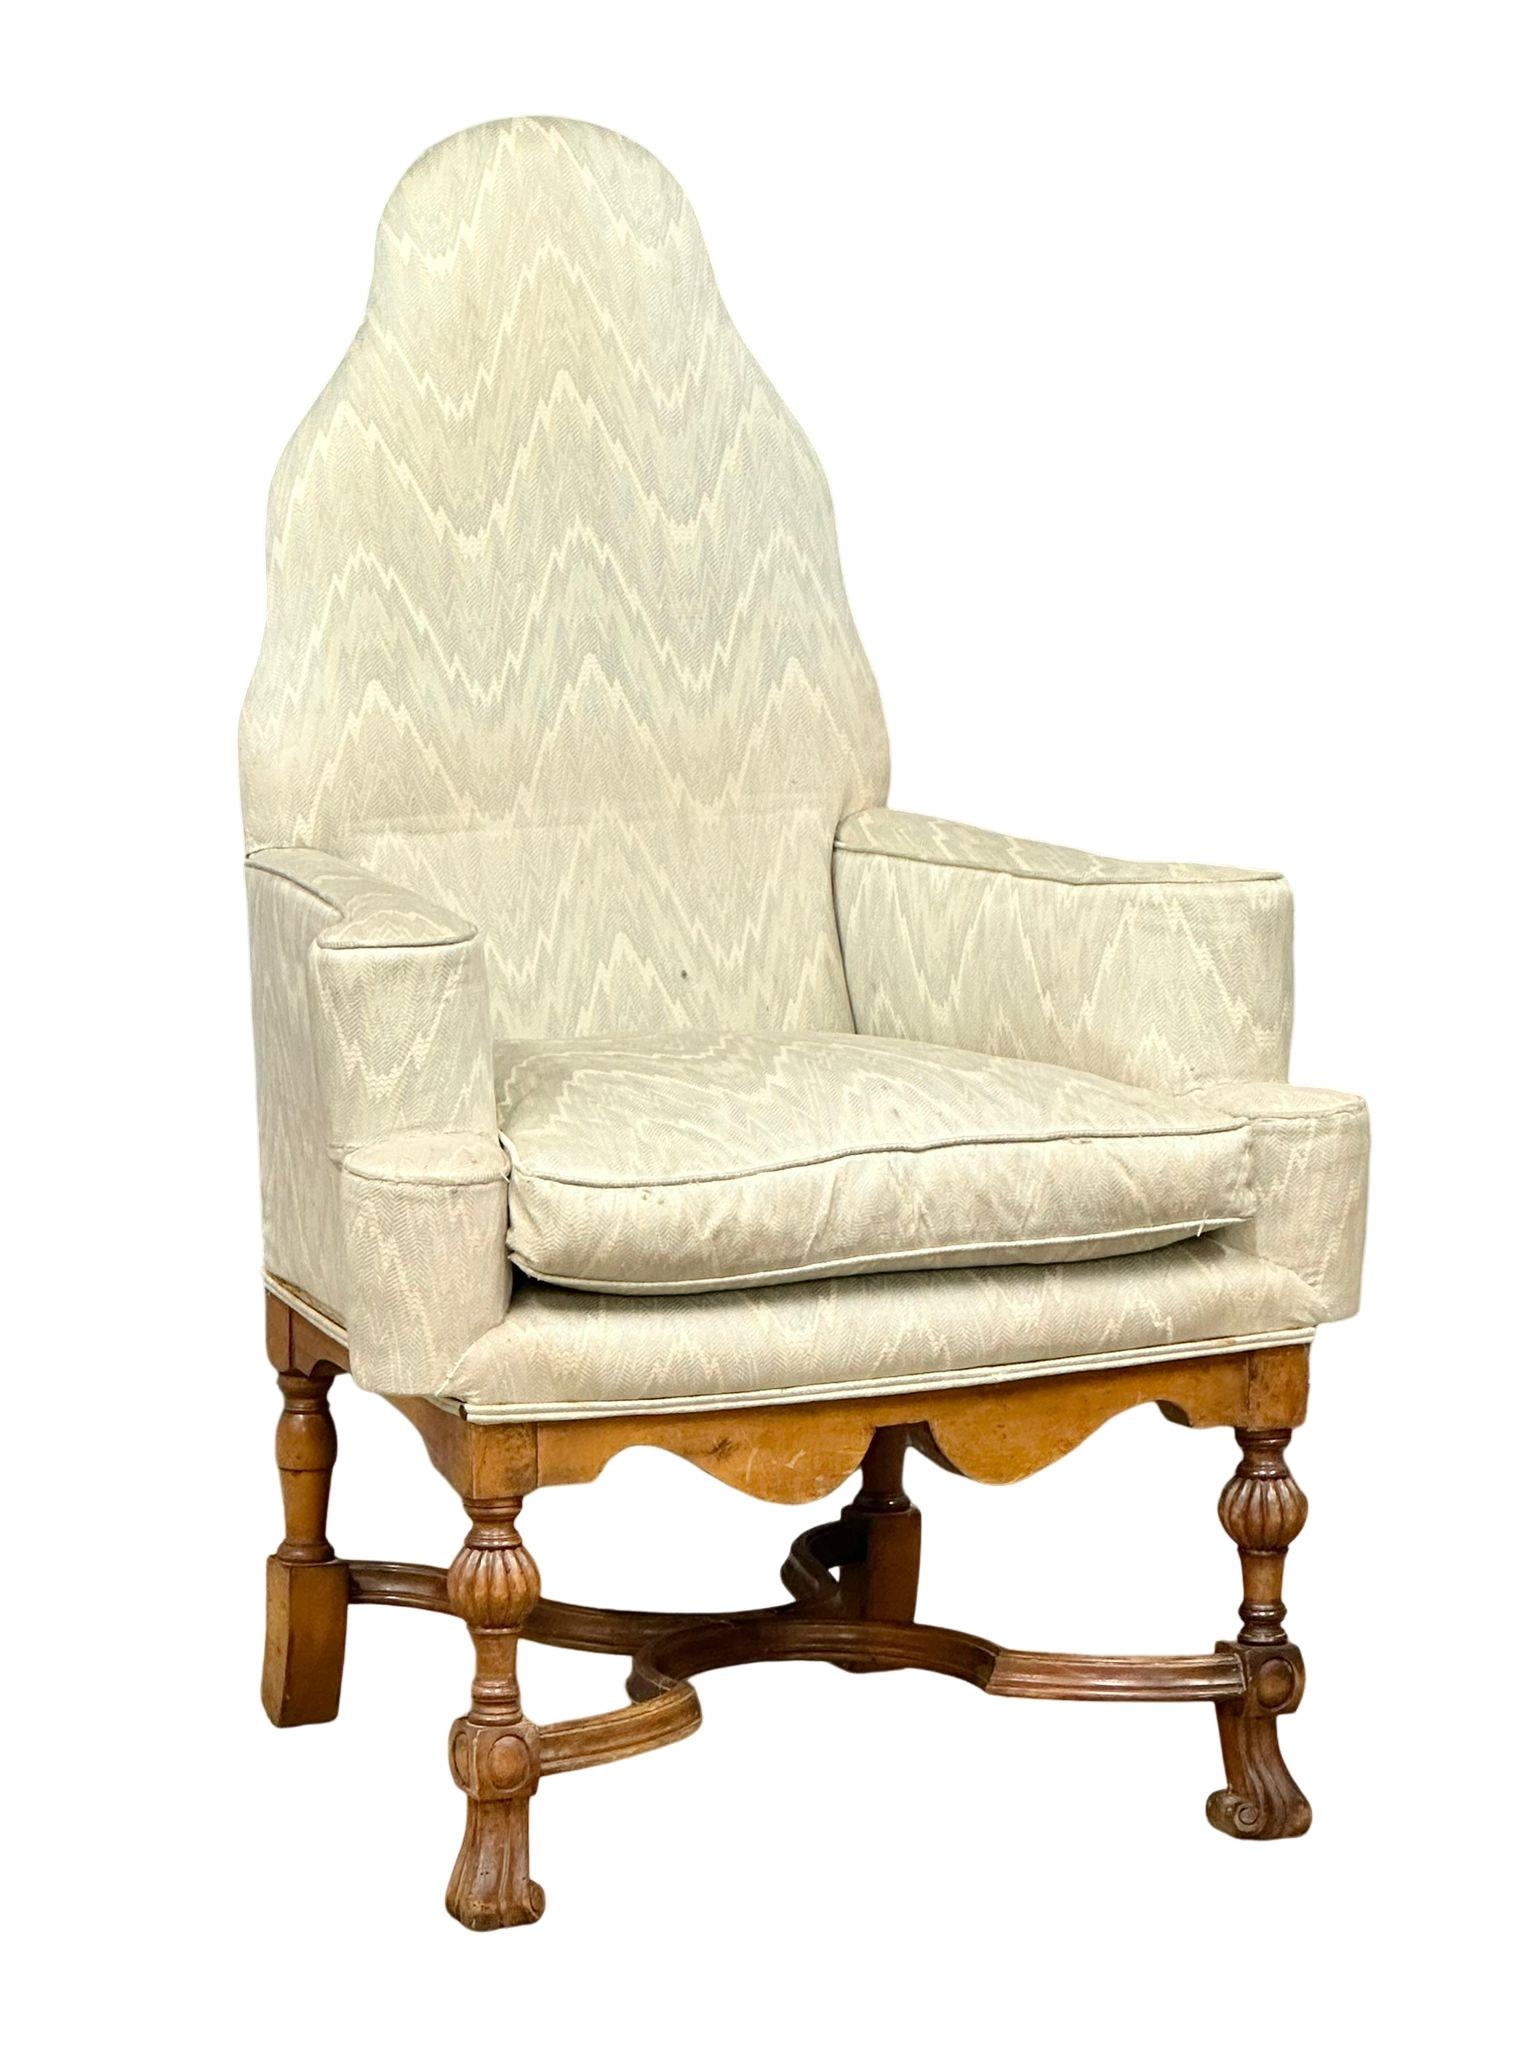 An early 20th century Charles II Carolean Revival armchair. Circa 1930. 63x80x122cm - Image 5 of 7